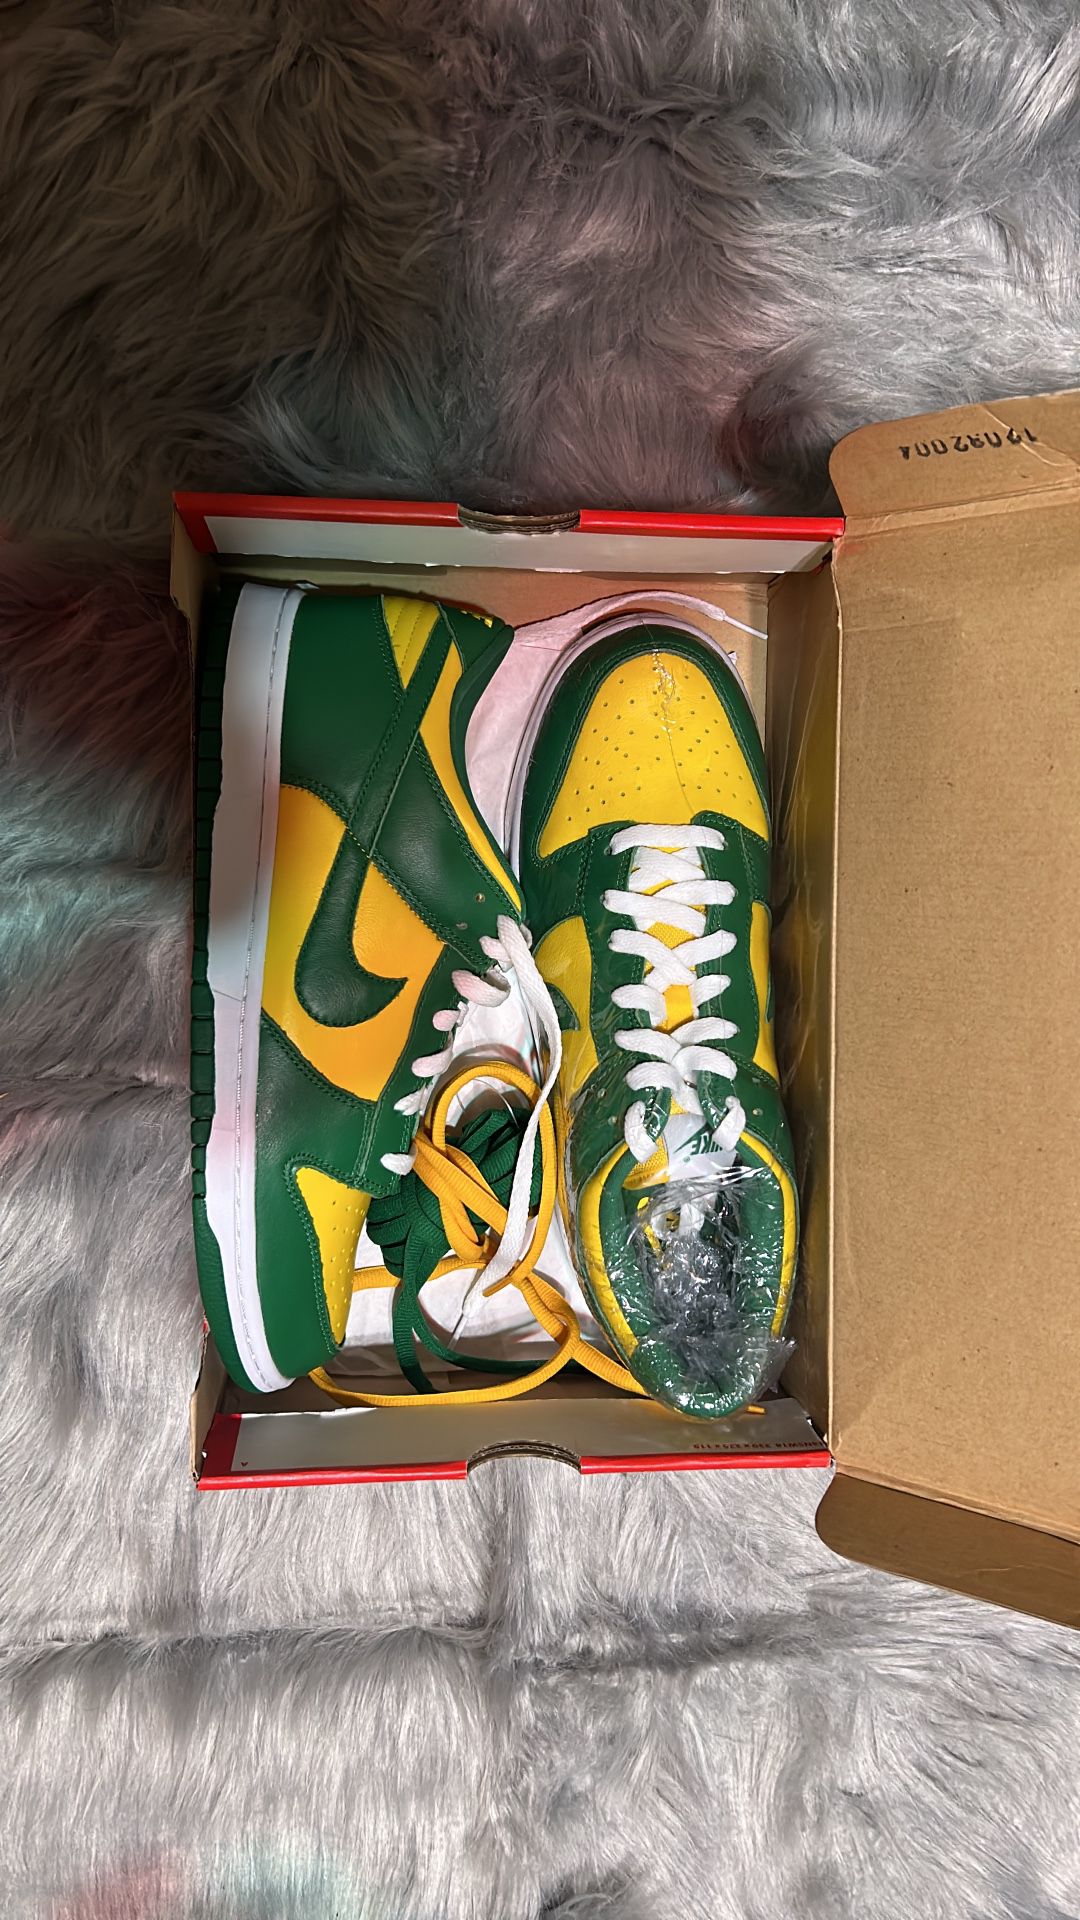 Nike Dunk Low “Brazil” Size 11 ds